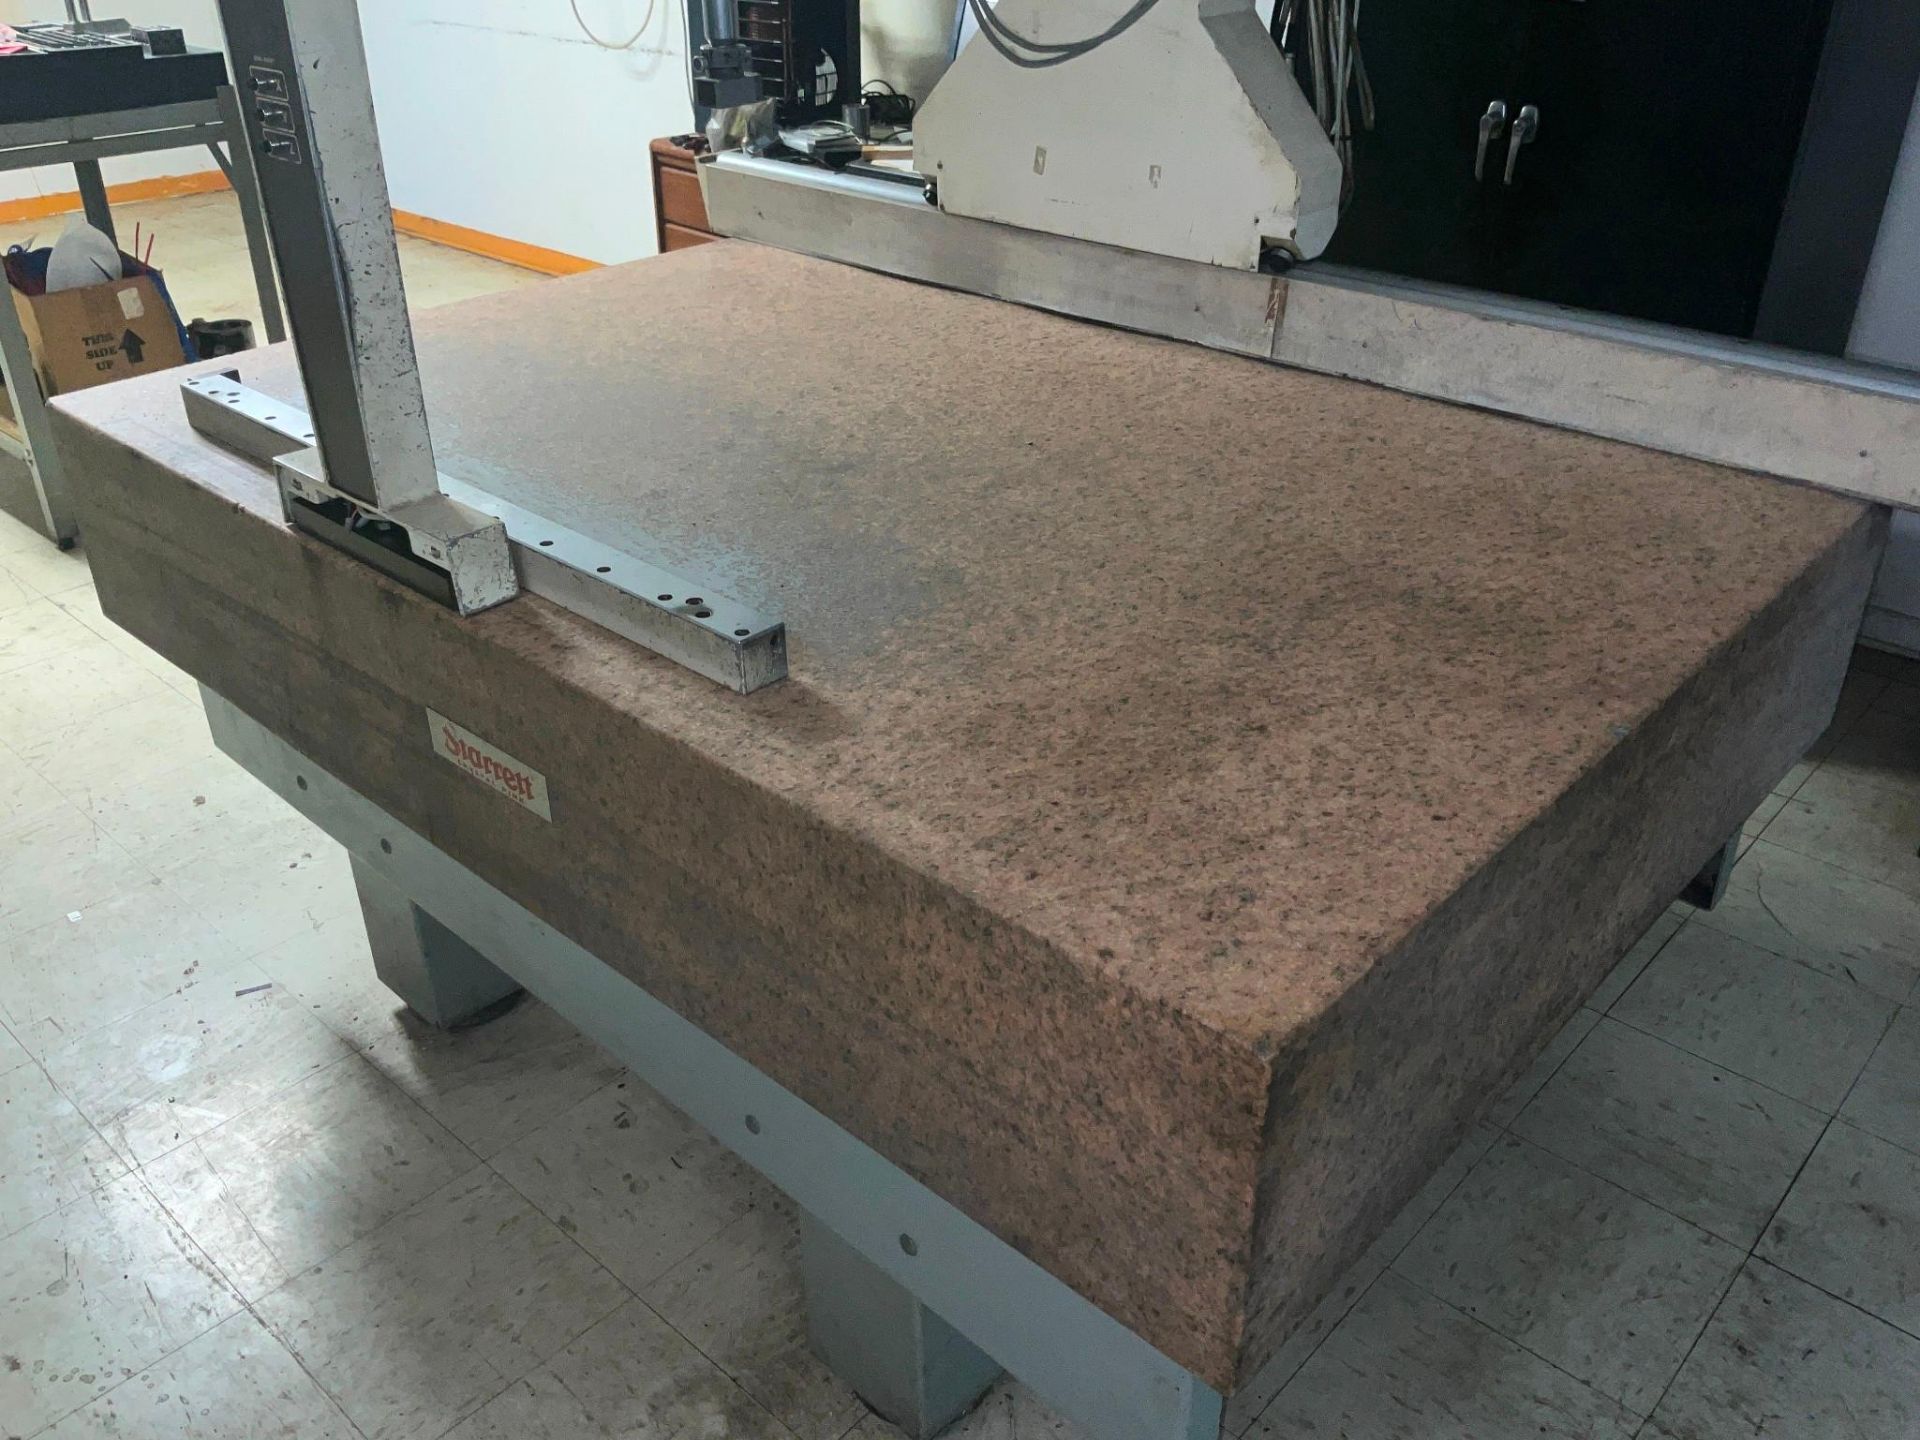 HANSFORD RAPID CHECK CMM (MISSING SOFTWARE) WITH PINK GRANITE TABLE - Image 9 of 14